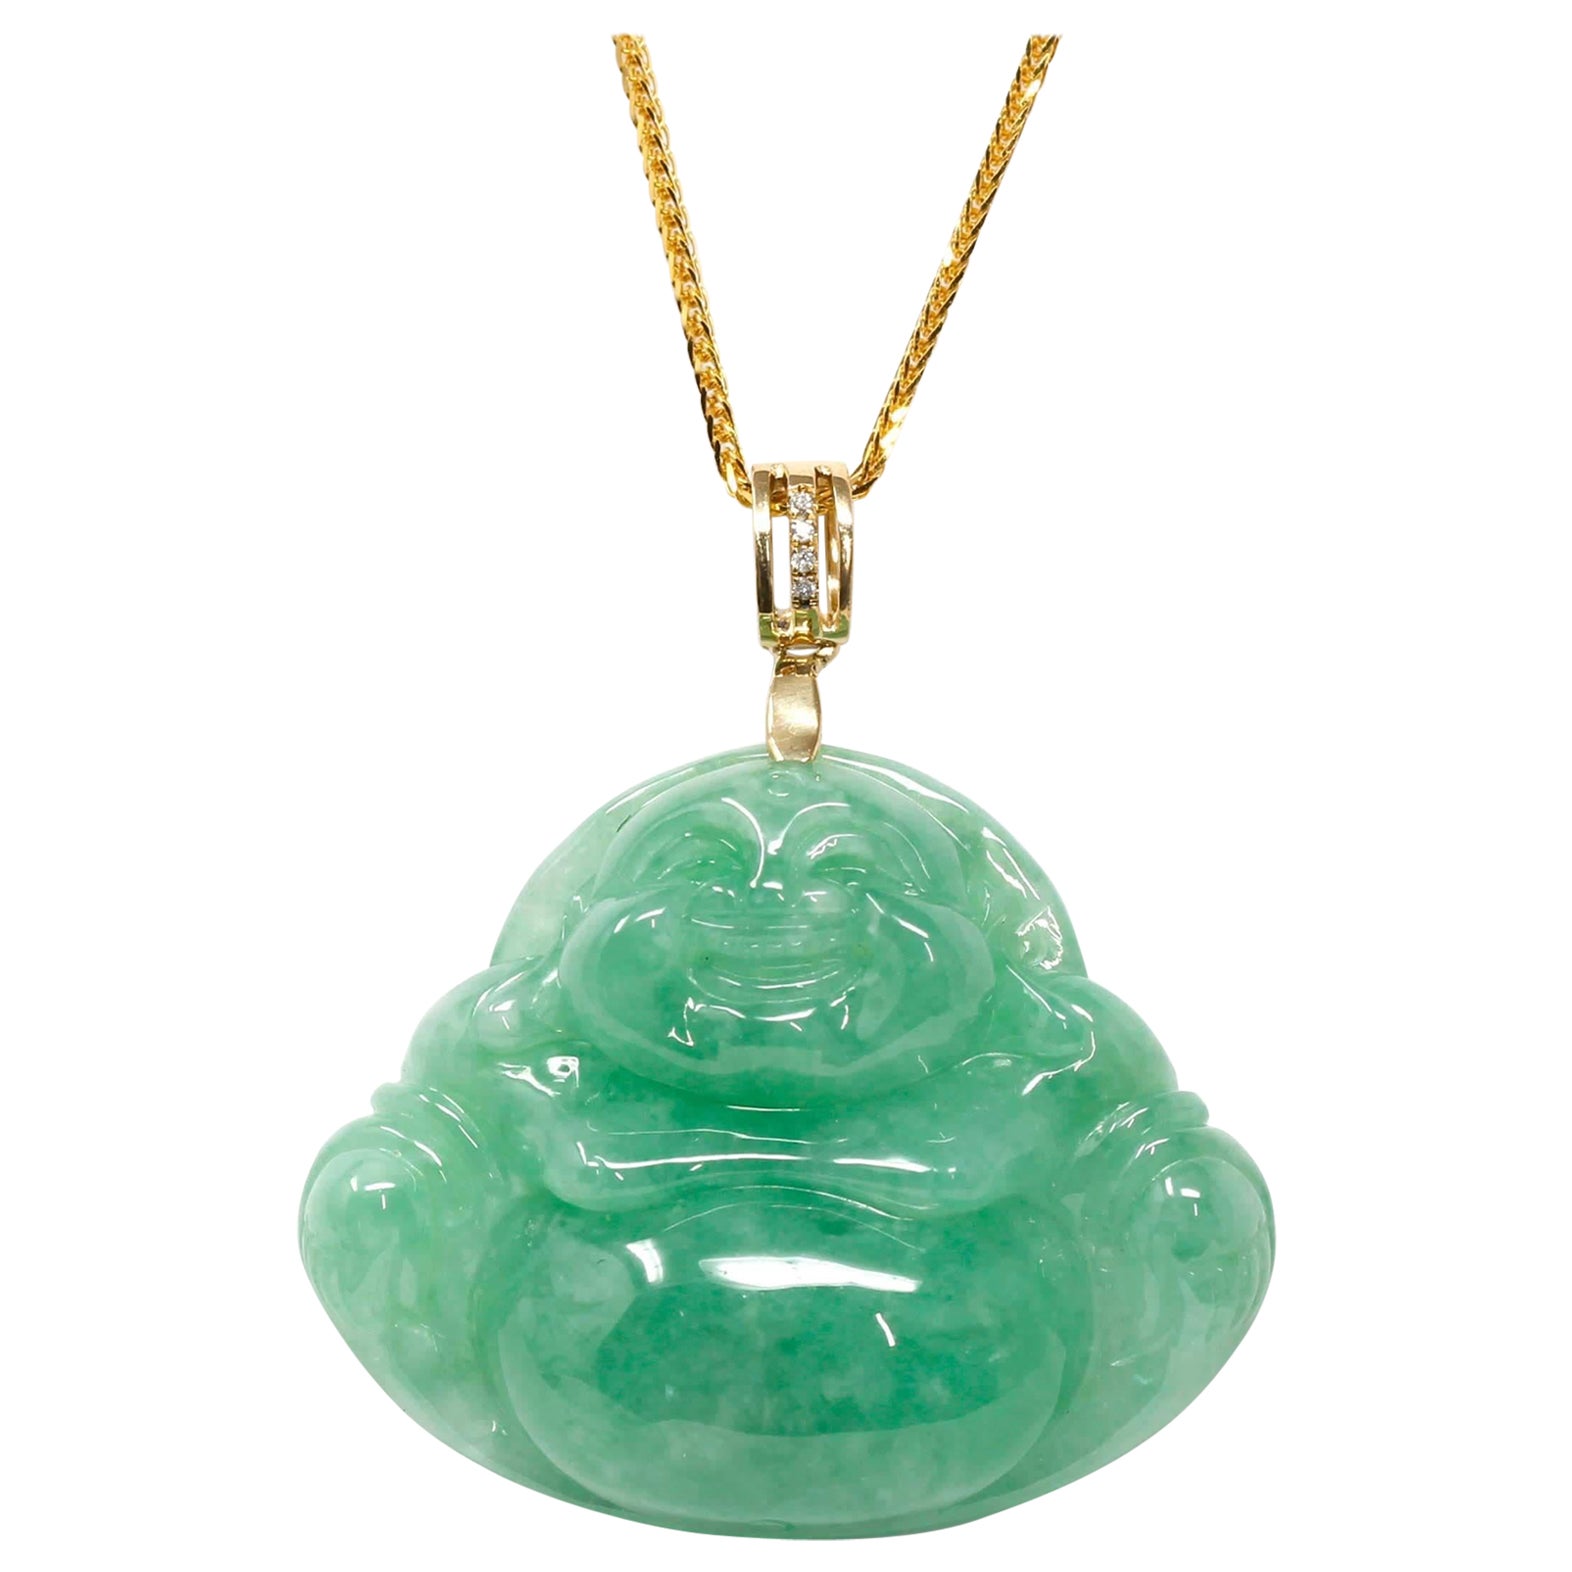 "Laughing Buddha" Green Jadeite Jade Necklace With 18k Yellow Gold Diamond Bail For Sale